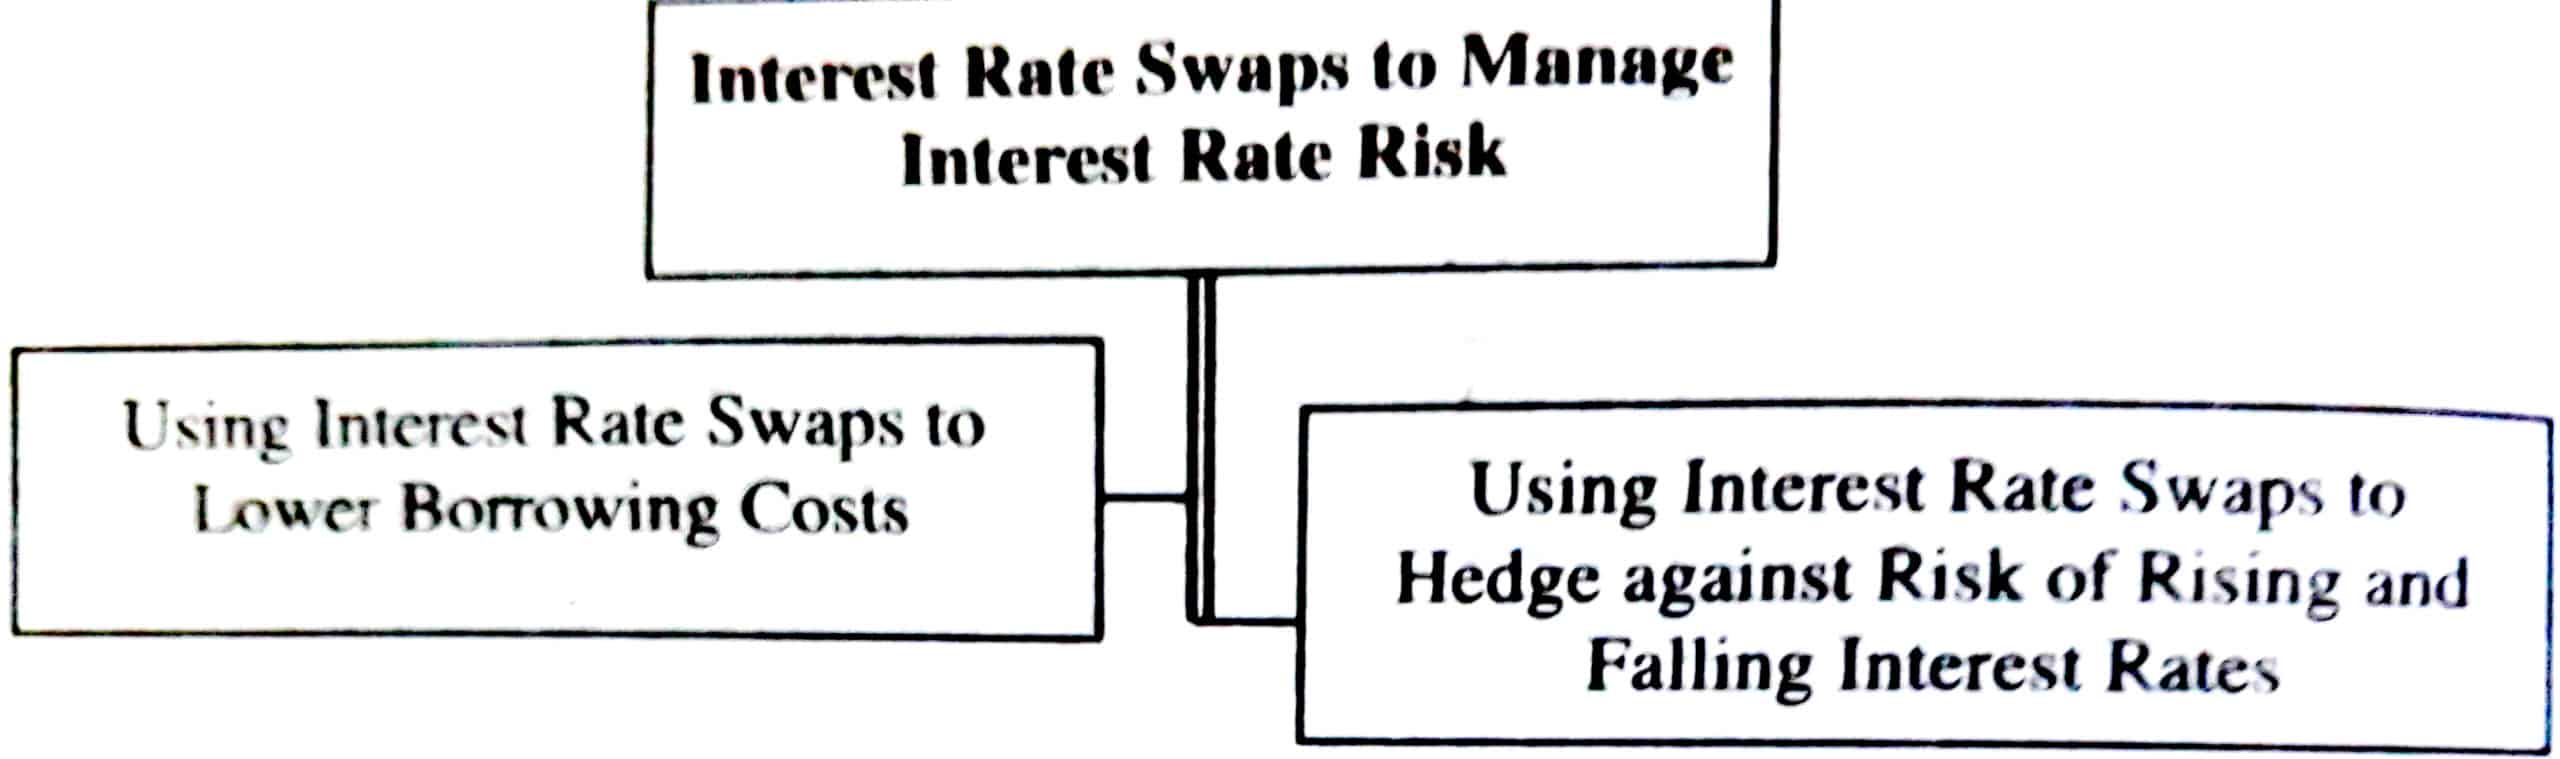 Interest Rate Swaps to Manage Interest Rate Risk